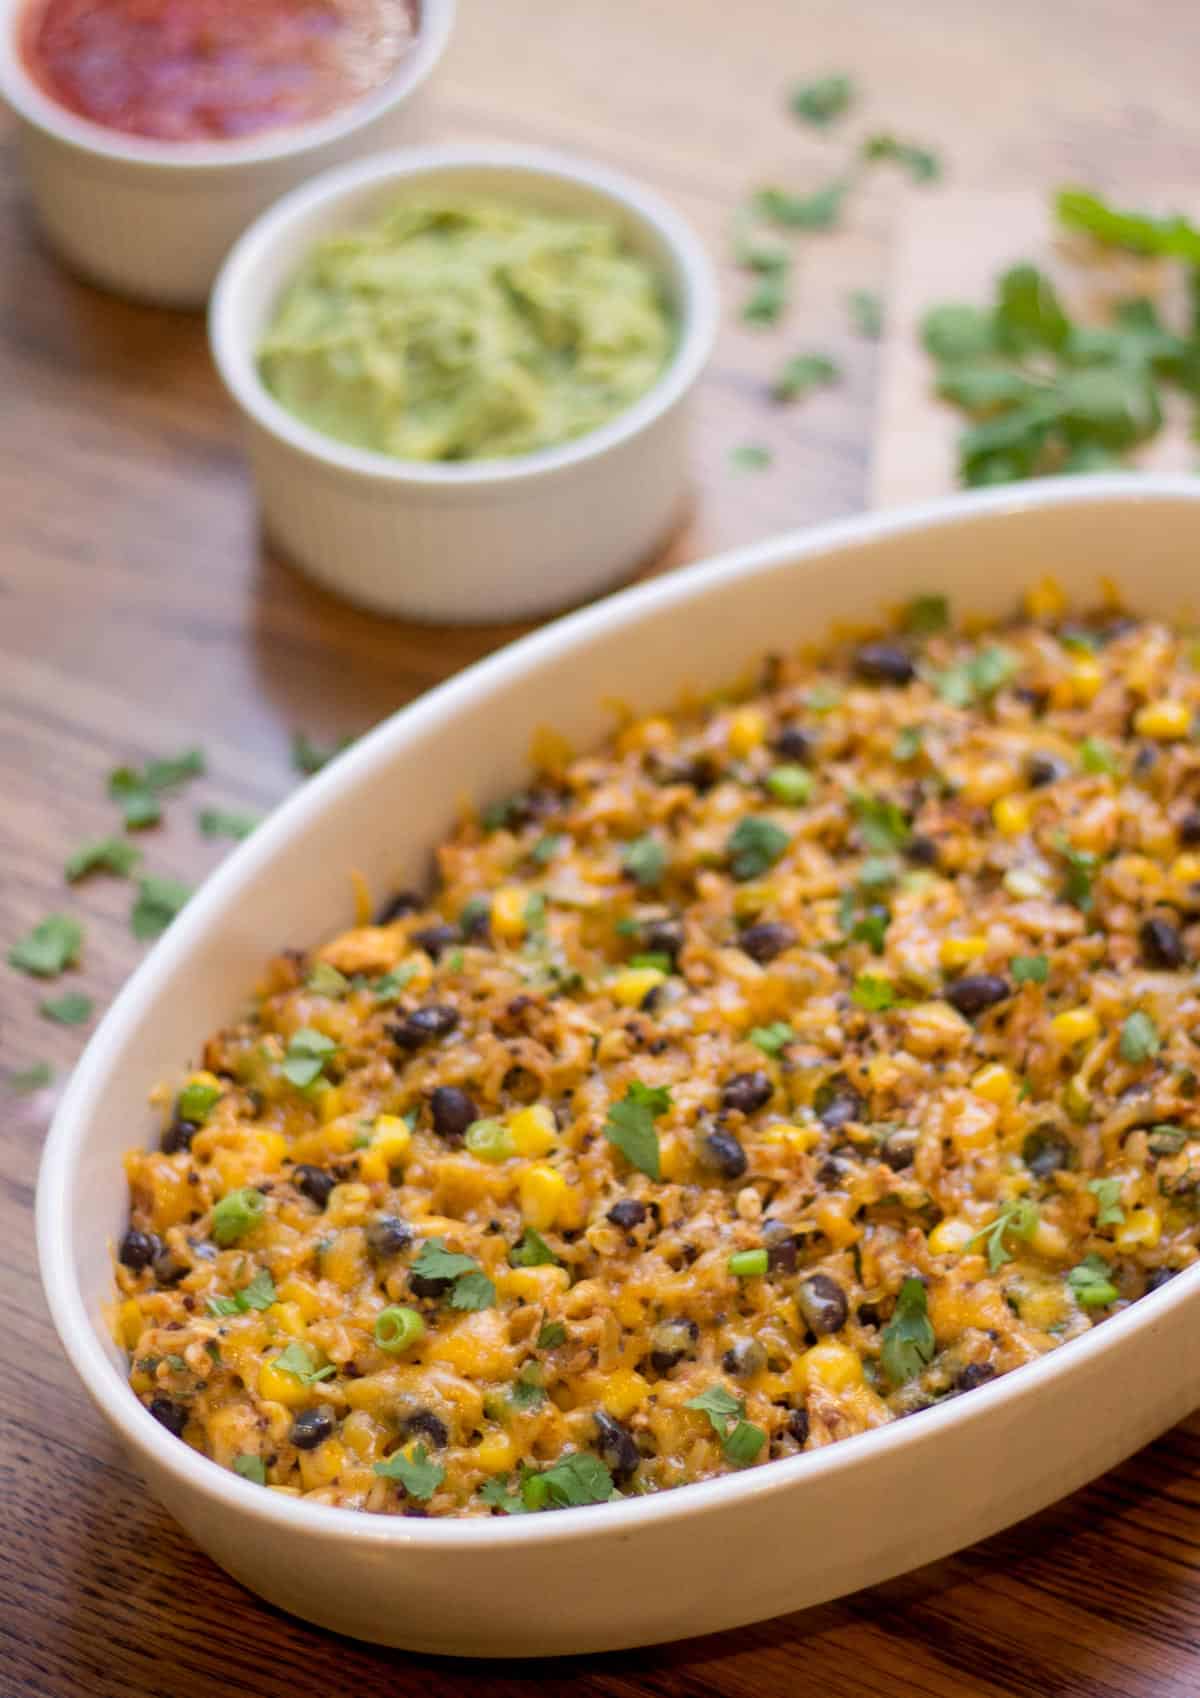 Casserole dish holding Mexican chicken, black beans and rice, with guacamole and salsa on the side